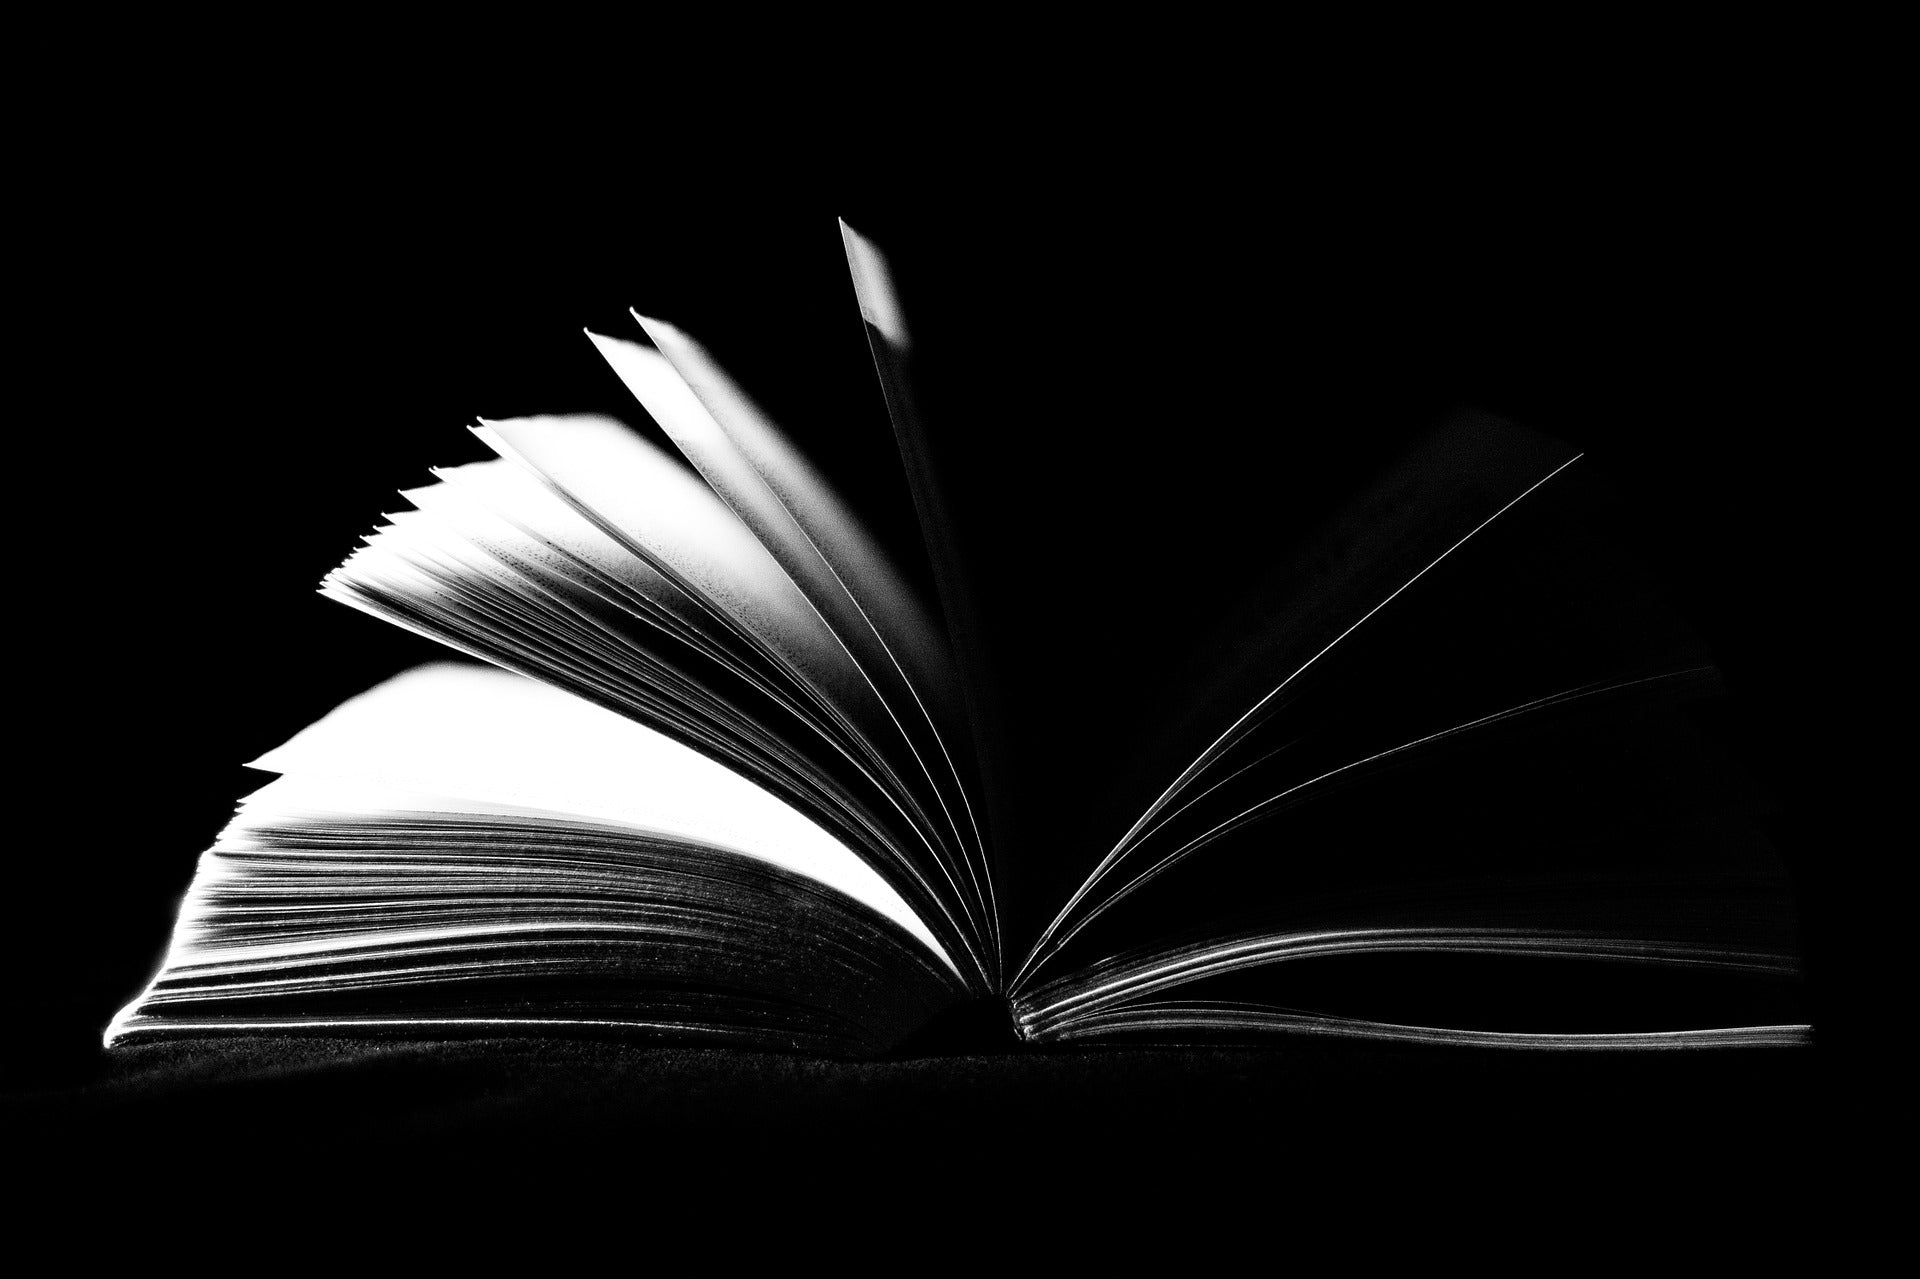 a black and white image of an open book with pages in motion